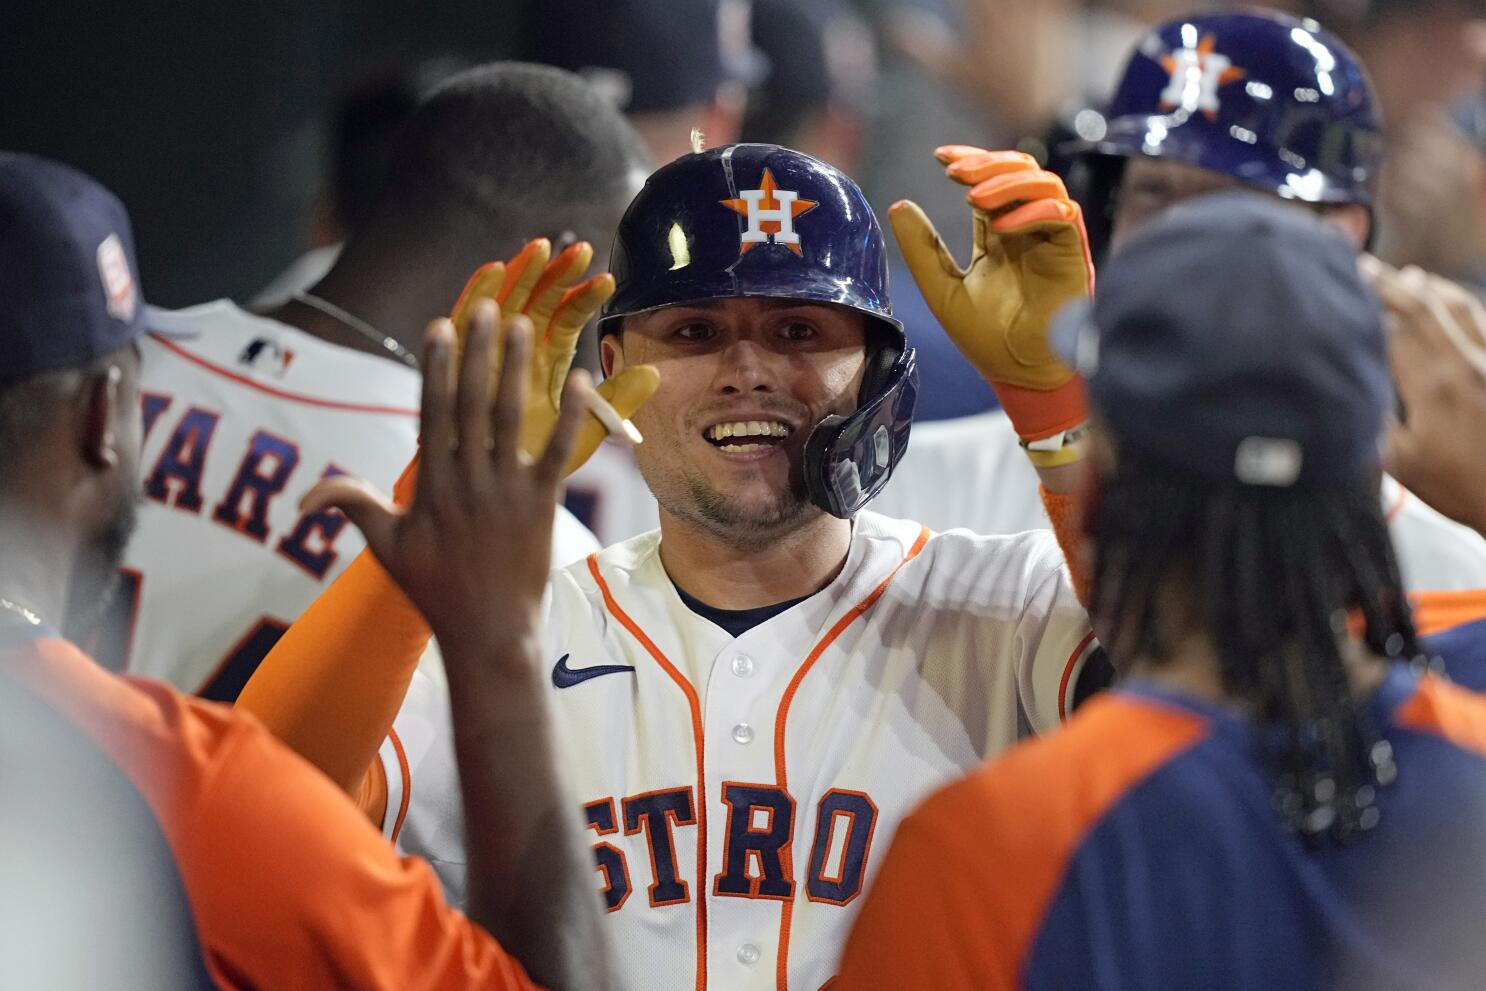 Diaz's grand slam leads Astros to 7th straight win